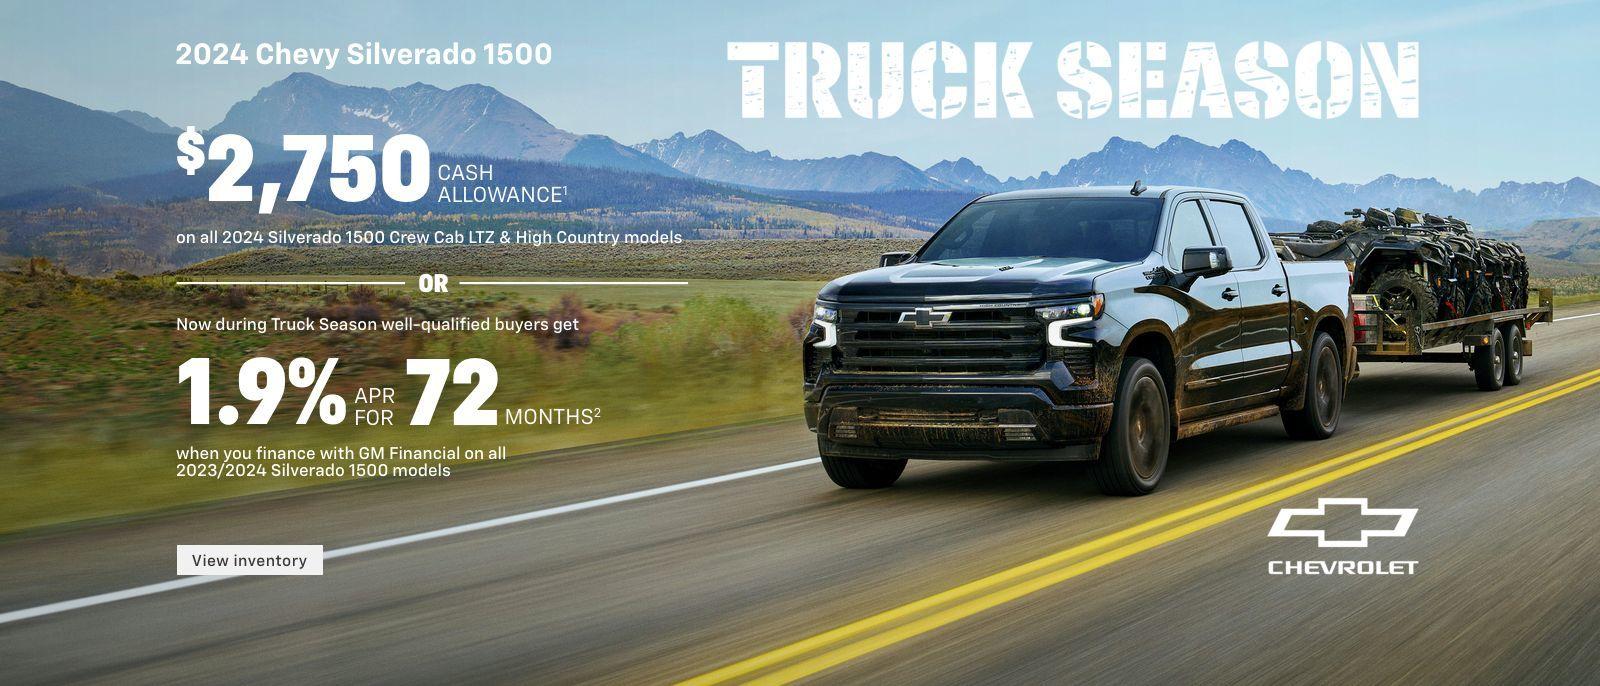 $2,750 cash allowance. Or, now during Truck Season well-qualified buyers get 2.9% APR for 72 months when you finance with GM Financial on all 2023/2024 Silverado 1500 models.